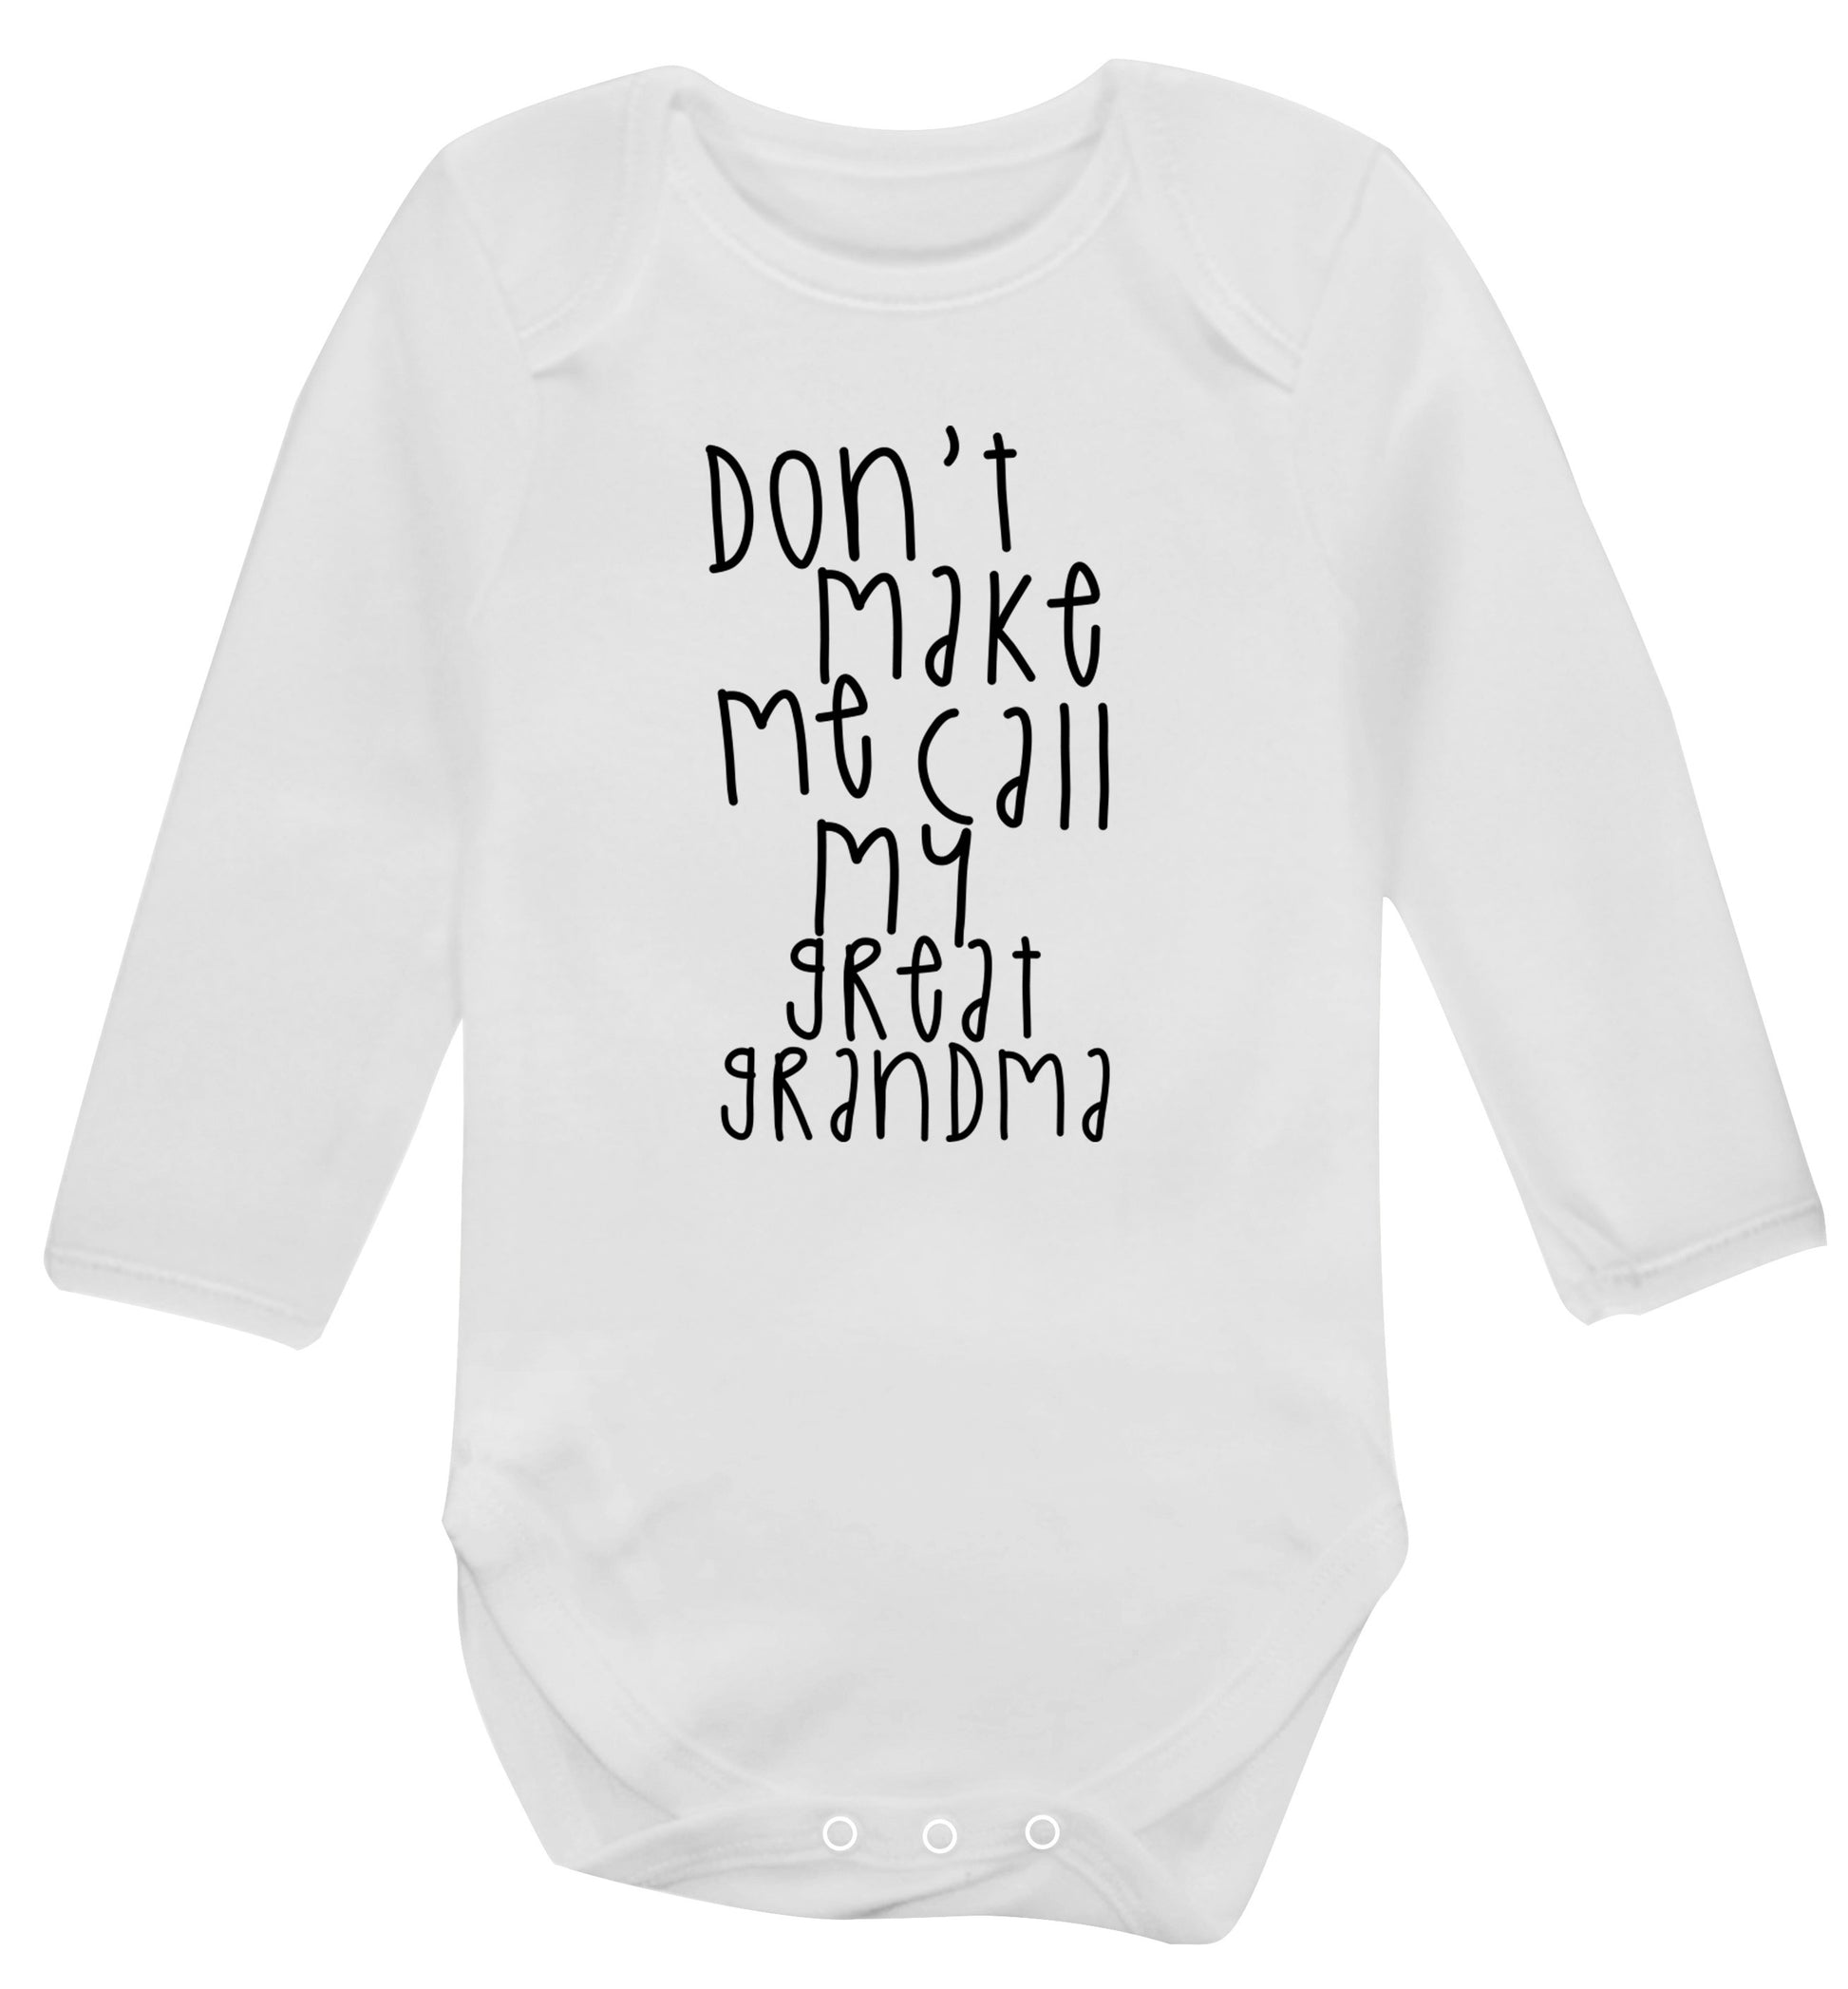 Don't make me call my great grandma Baby Vest long sleeved white 6-12 months